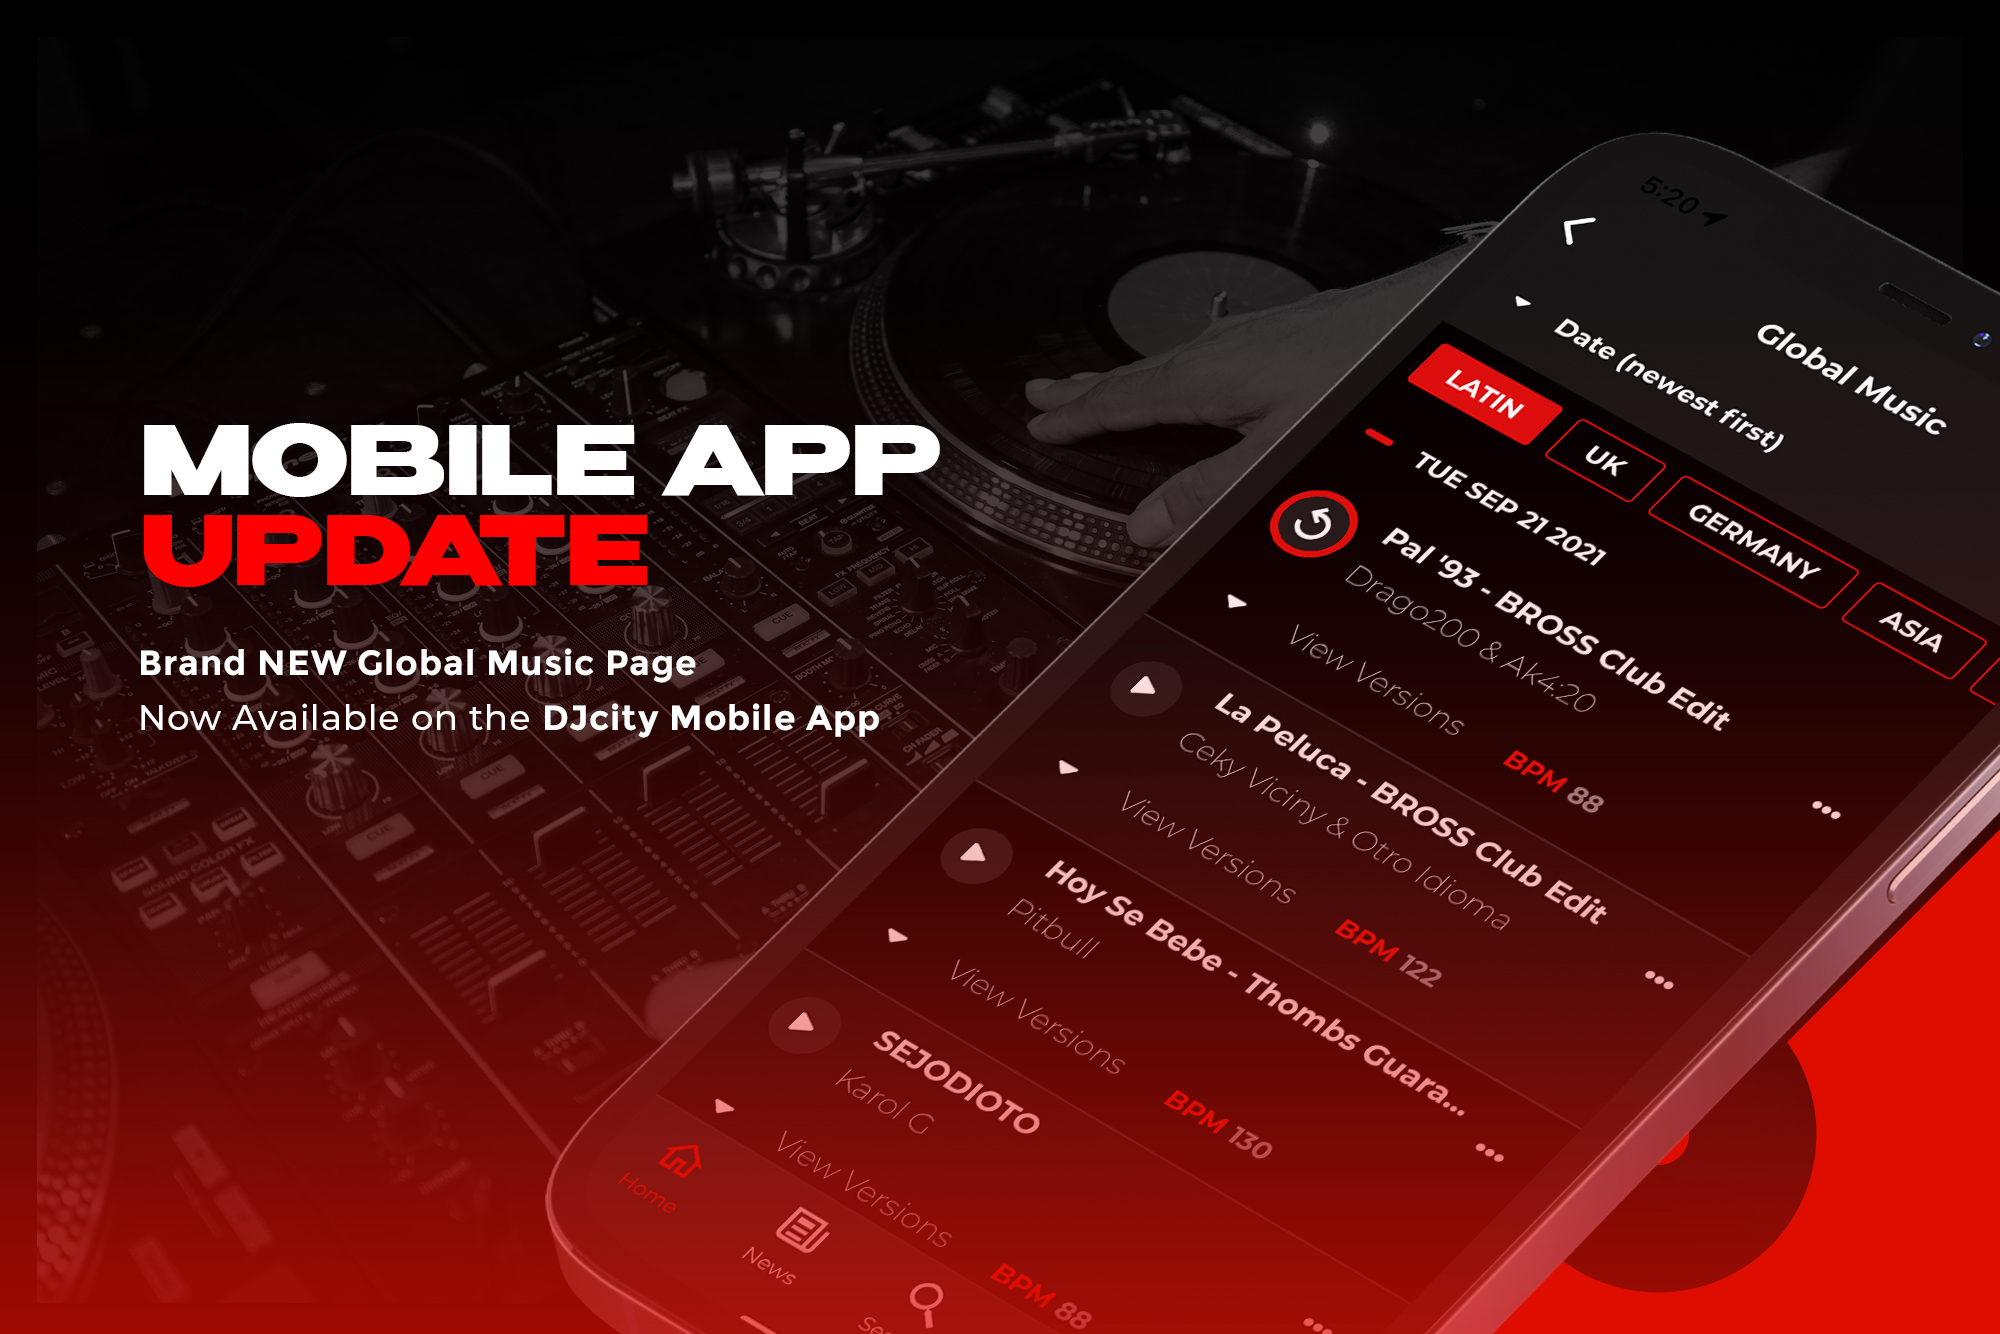 New Global Music Page Now Available On the DJcity Mobile App